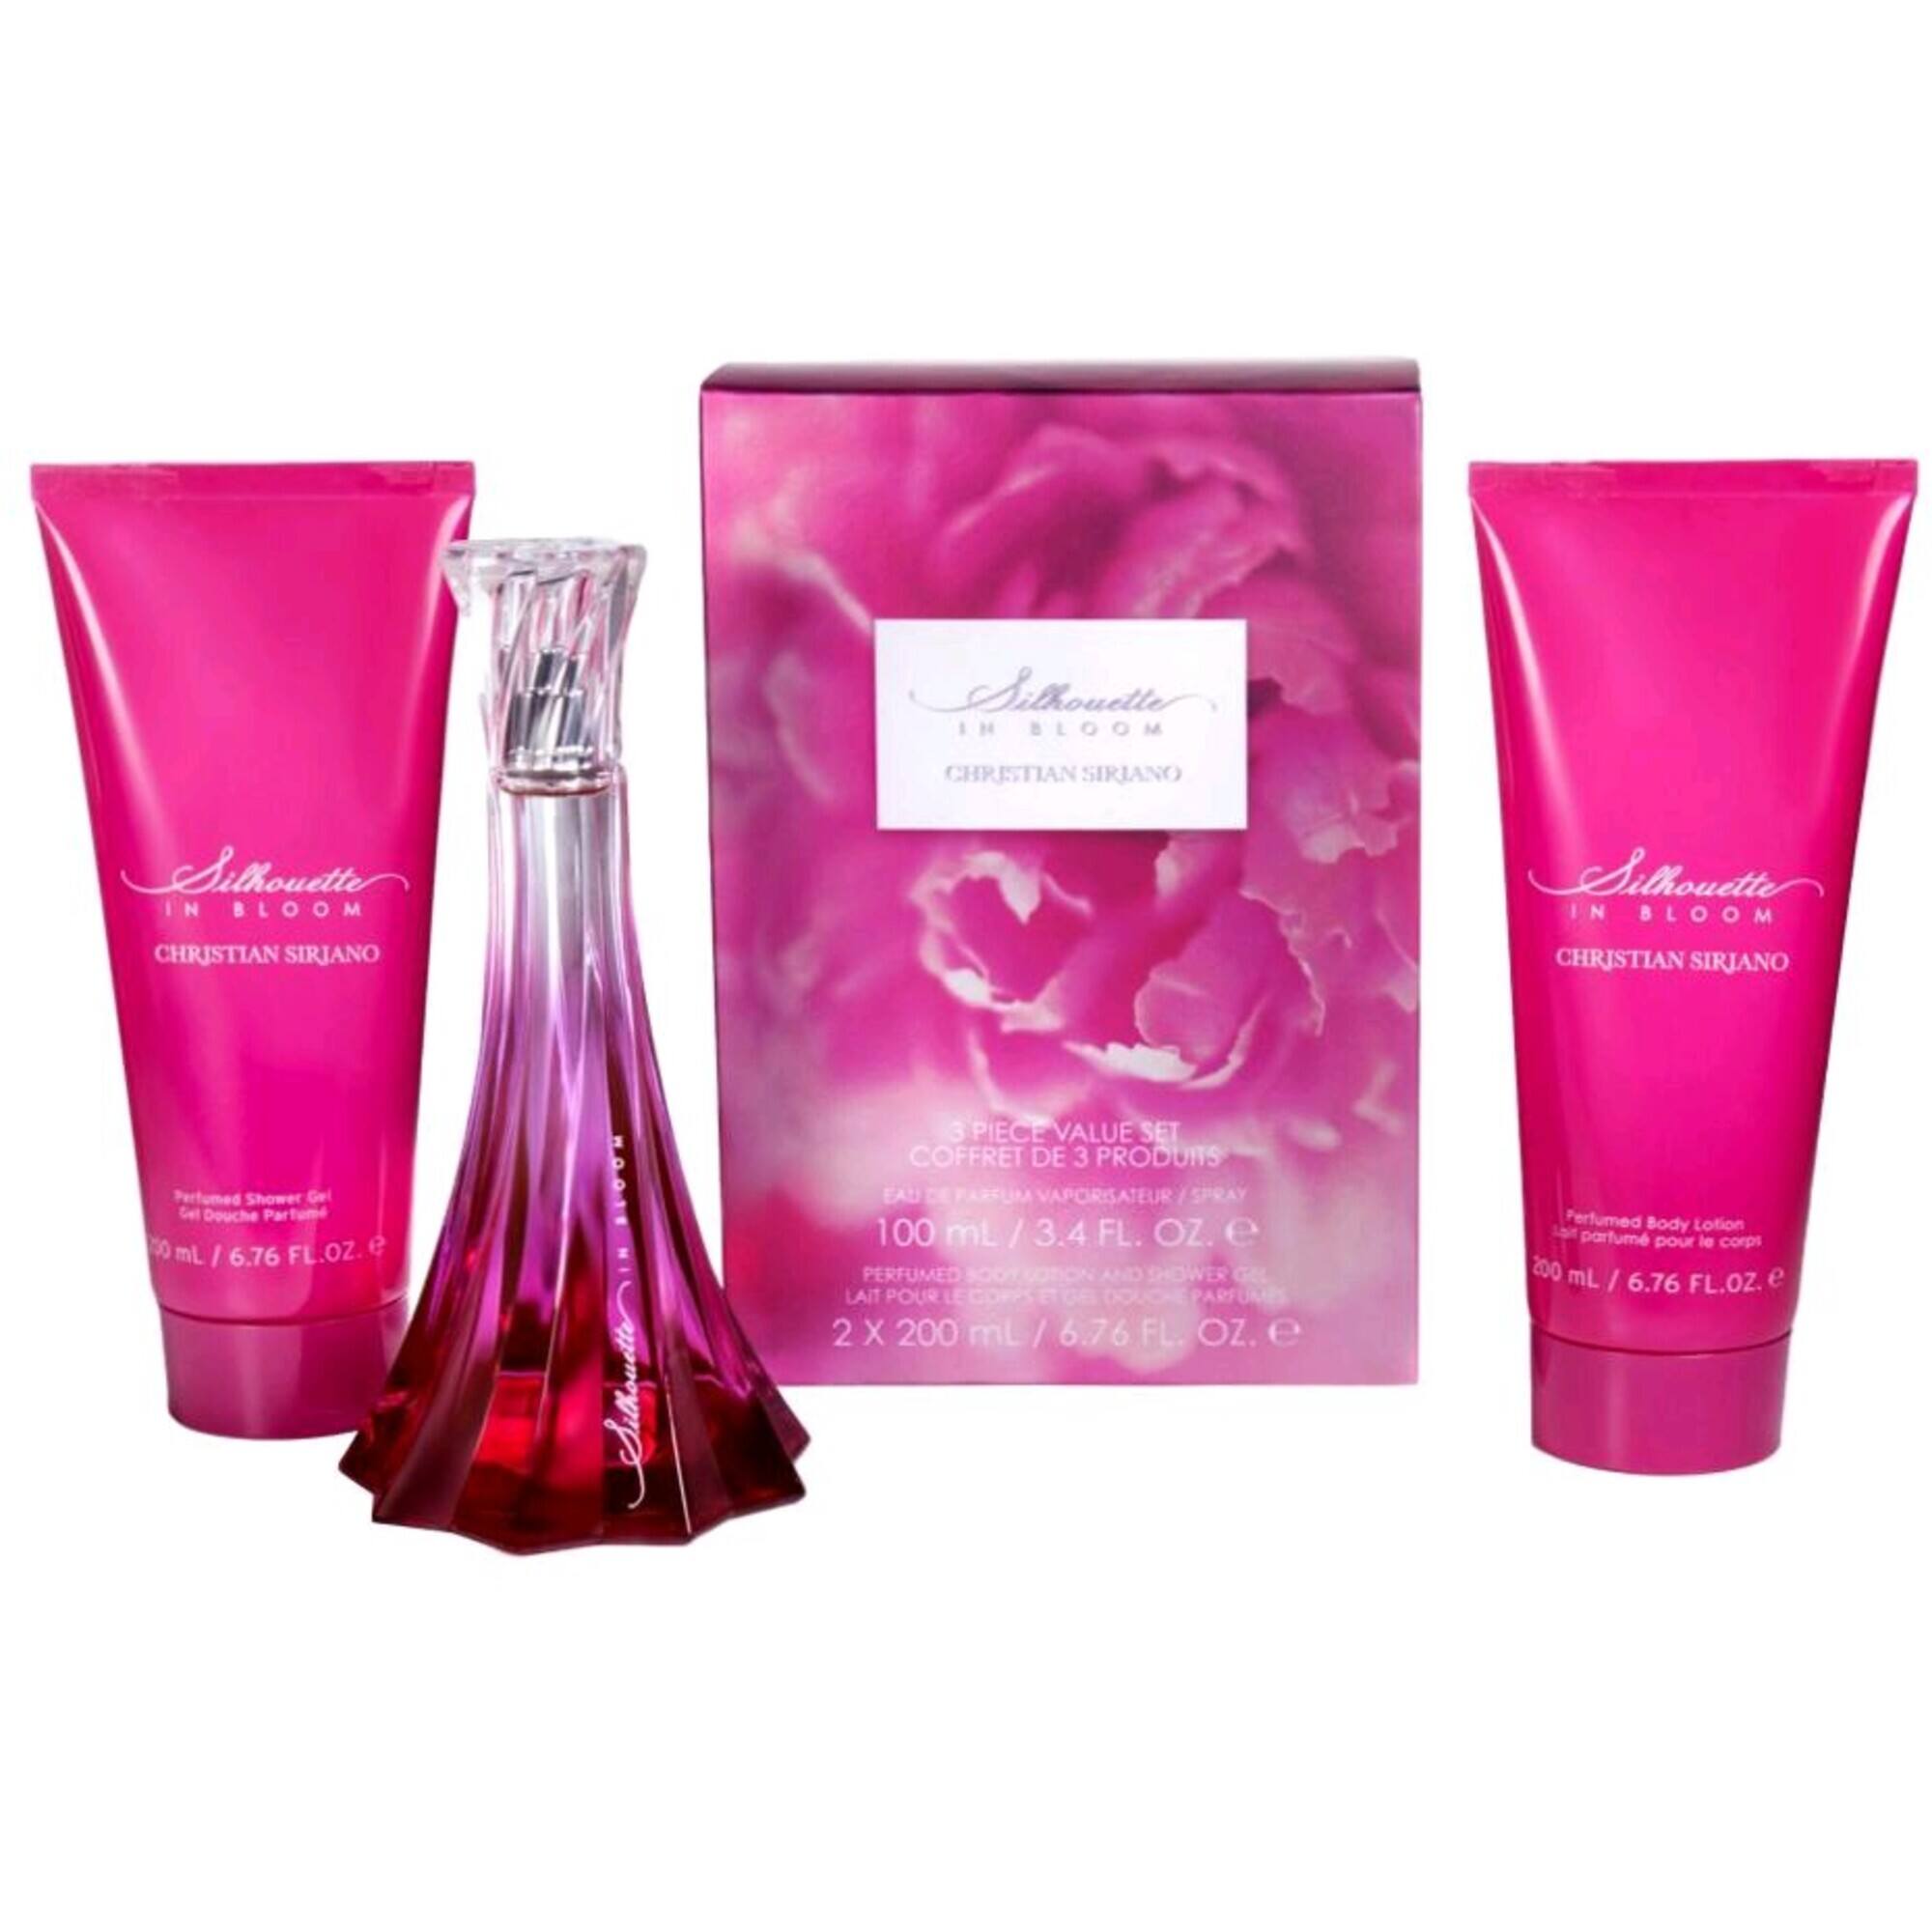 Christian Siriano Women's Gift Set - Silhouette In Bloom Captivating Scent, 3 piece